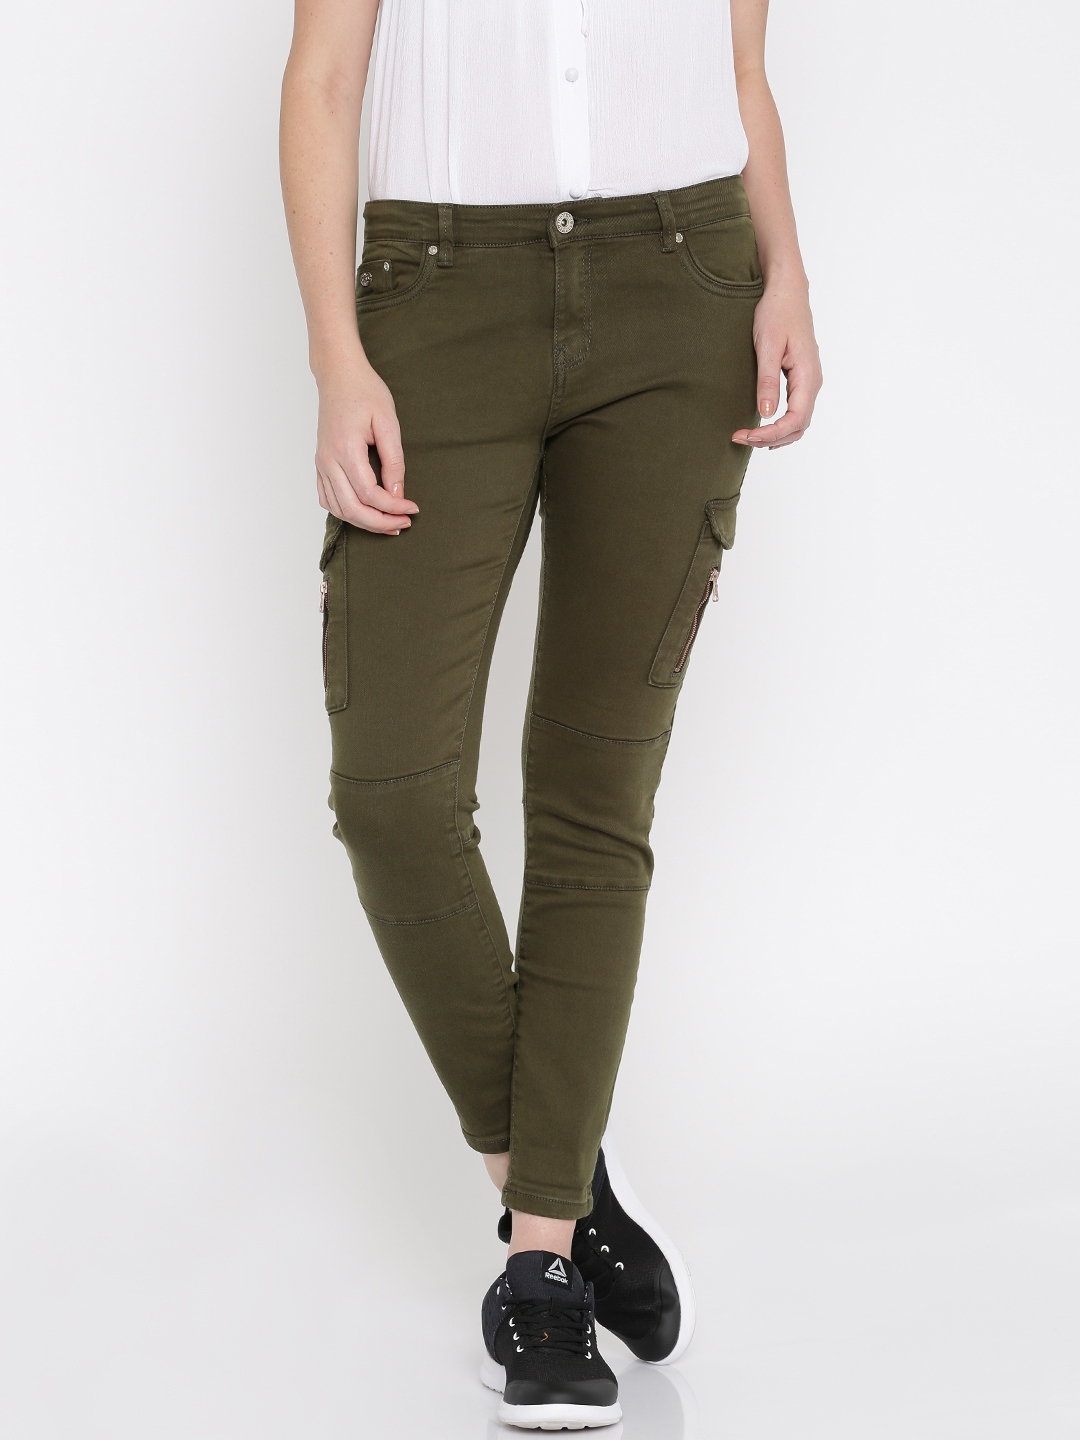 FOREVER 21 Women Olive Green Cargo Trousers